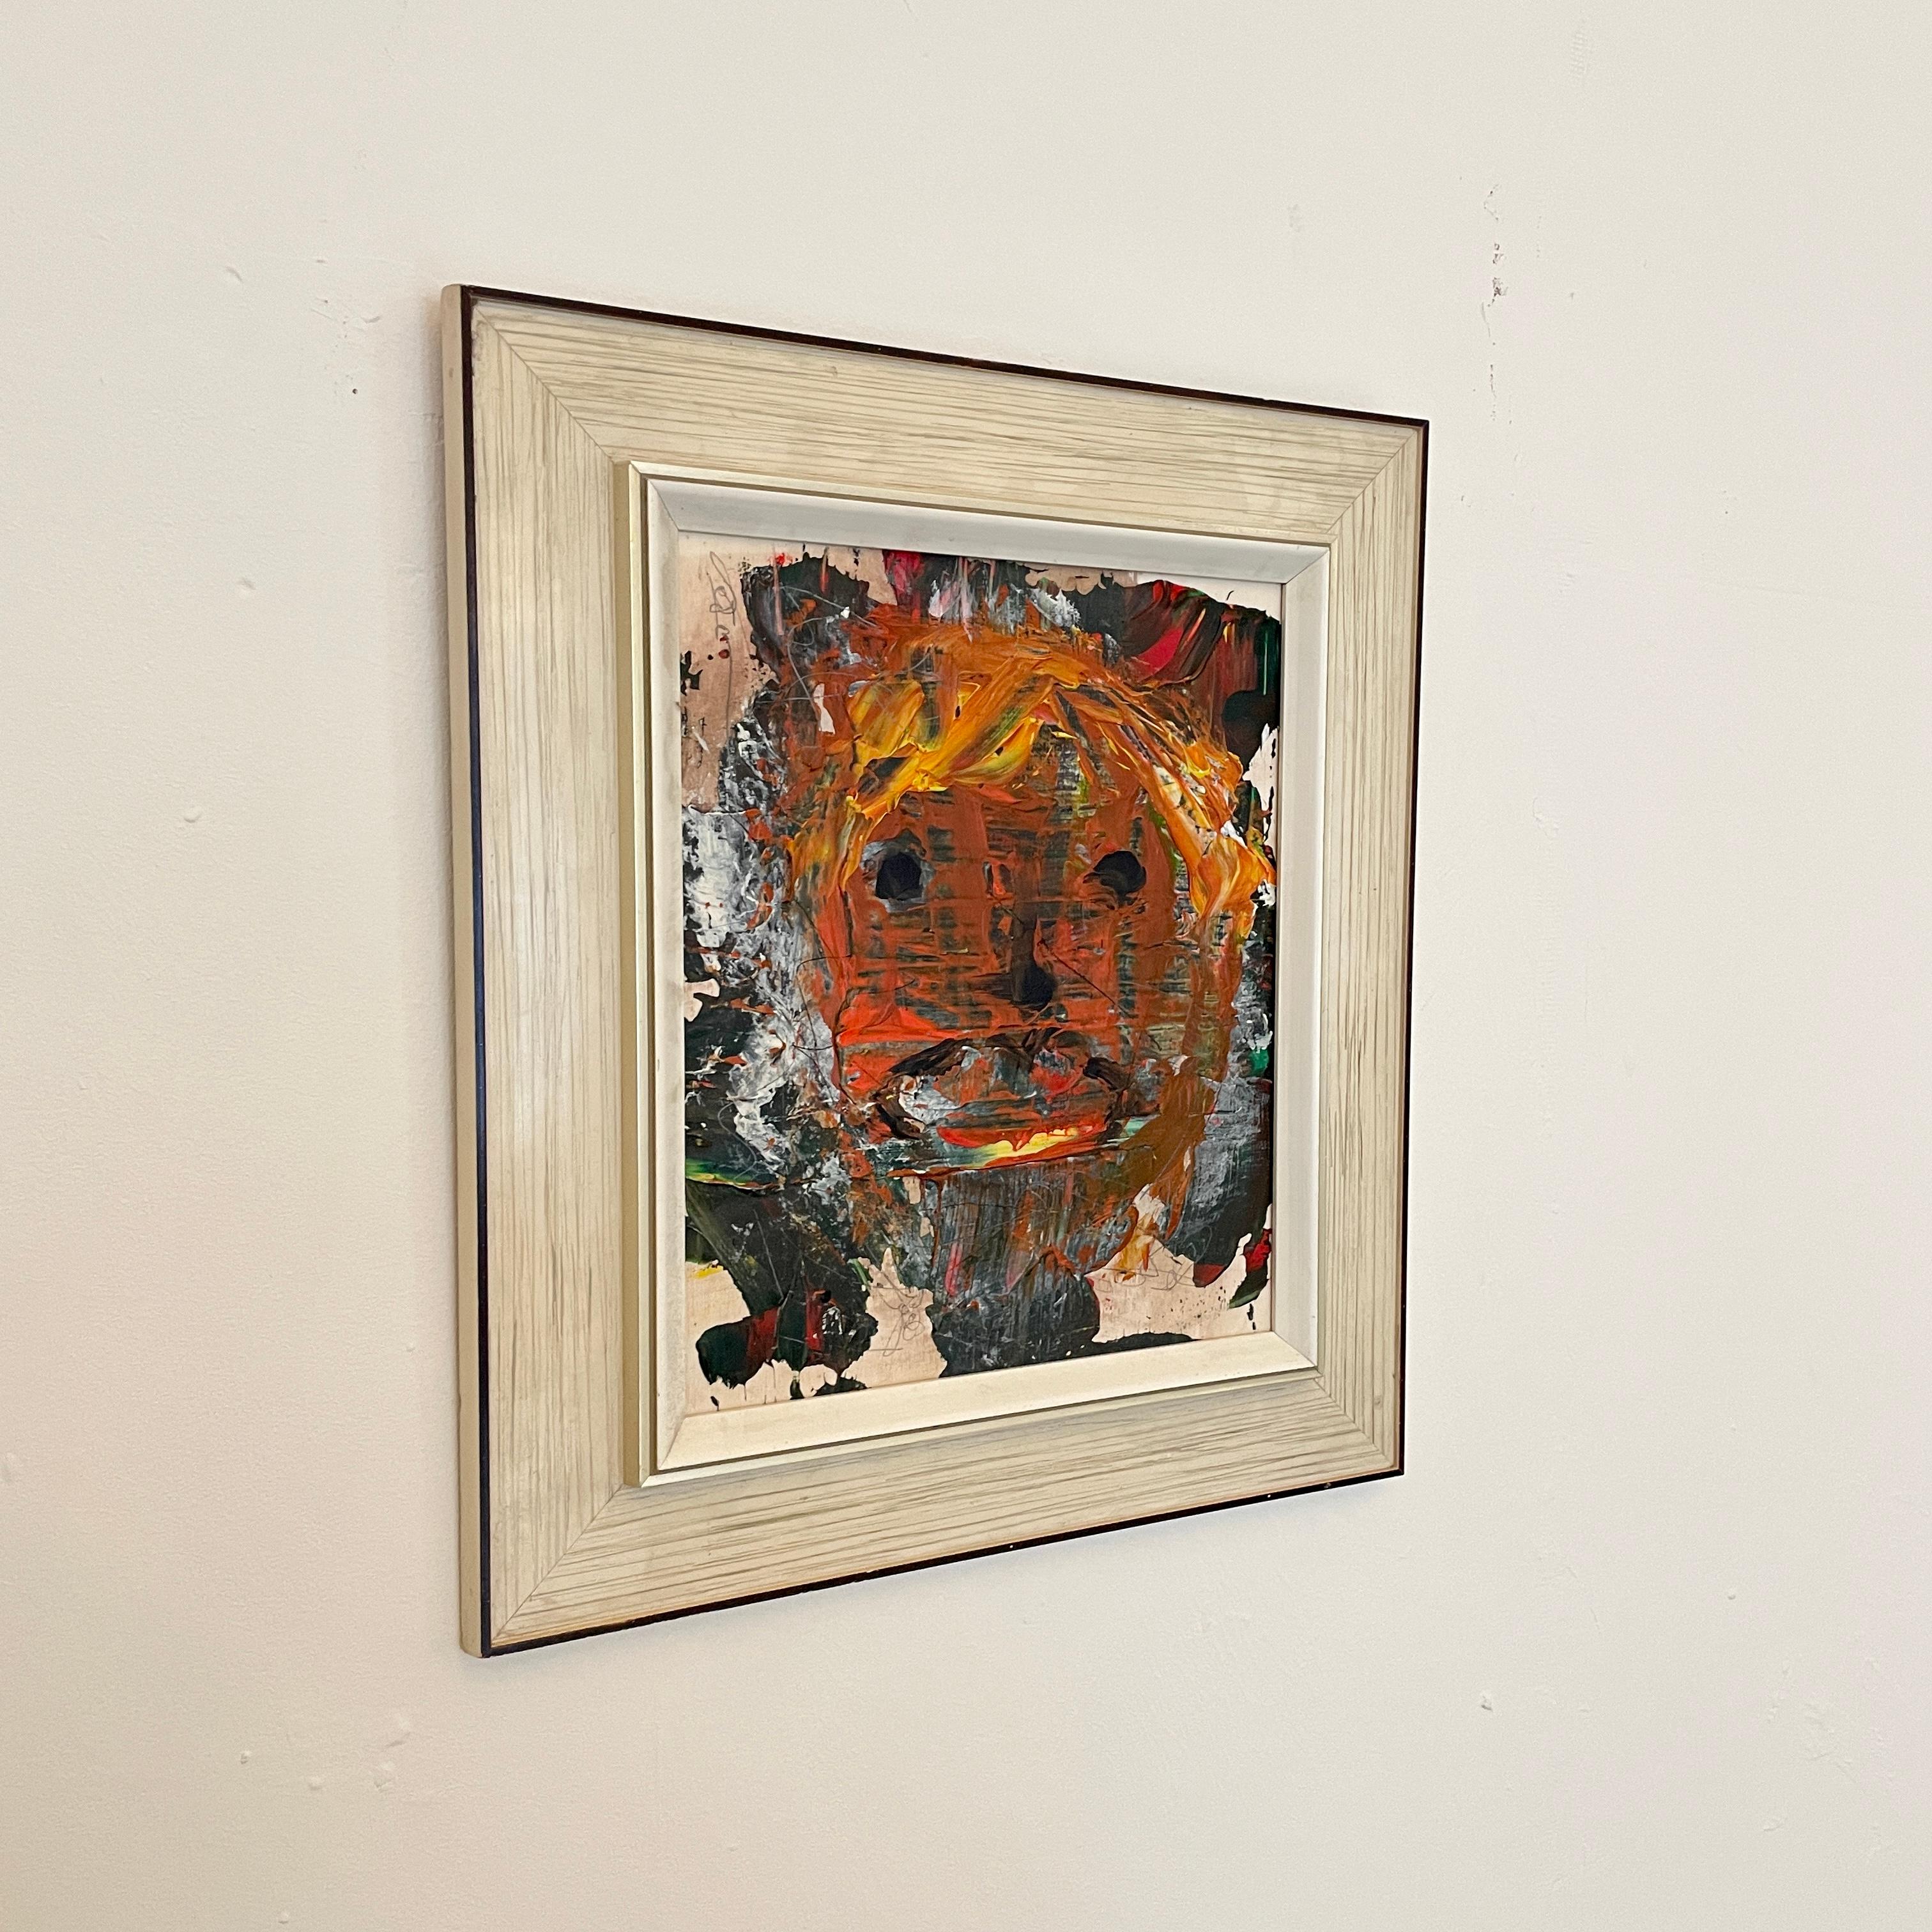 This painting has heavily textured acrylics in multicolored on wood. 
The artist created the piece using multiple techniques like palet knife, brush and pencil. 
It is framed in a mid century frame from the 1970s.
The series is called Faces. There